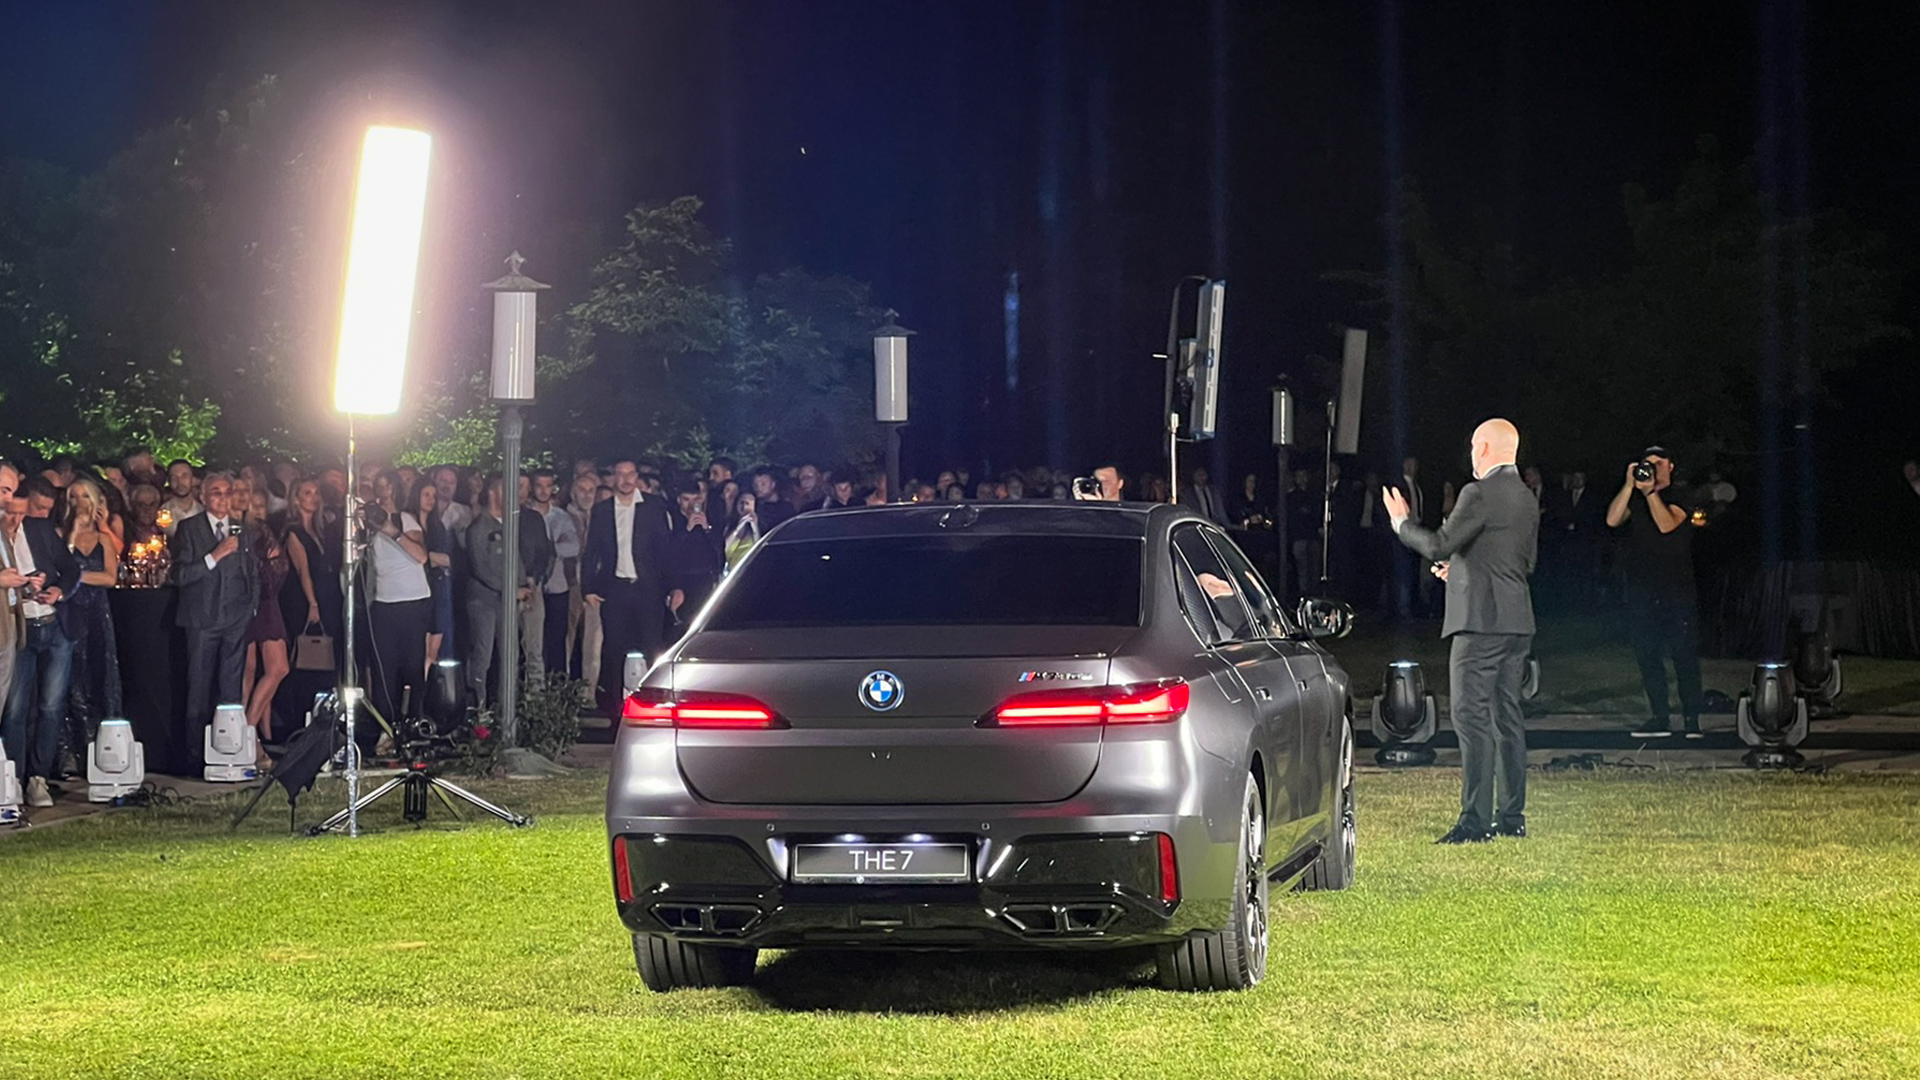  All-new BMW 7 Series and the BMW X7